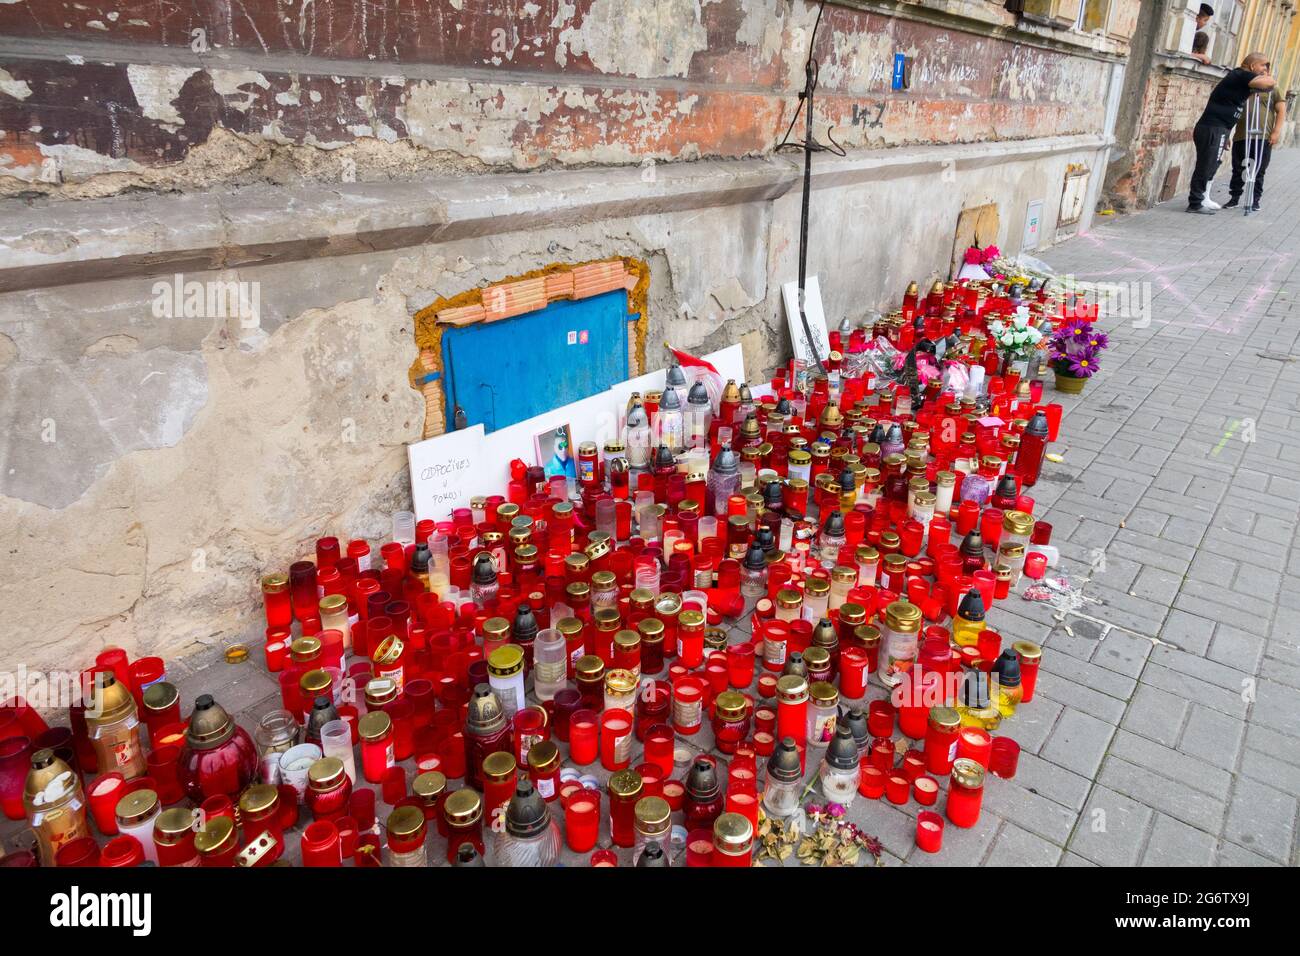 A place of reverence for the man who died after the police intervention Teplice Czech Republic Stock Photo